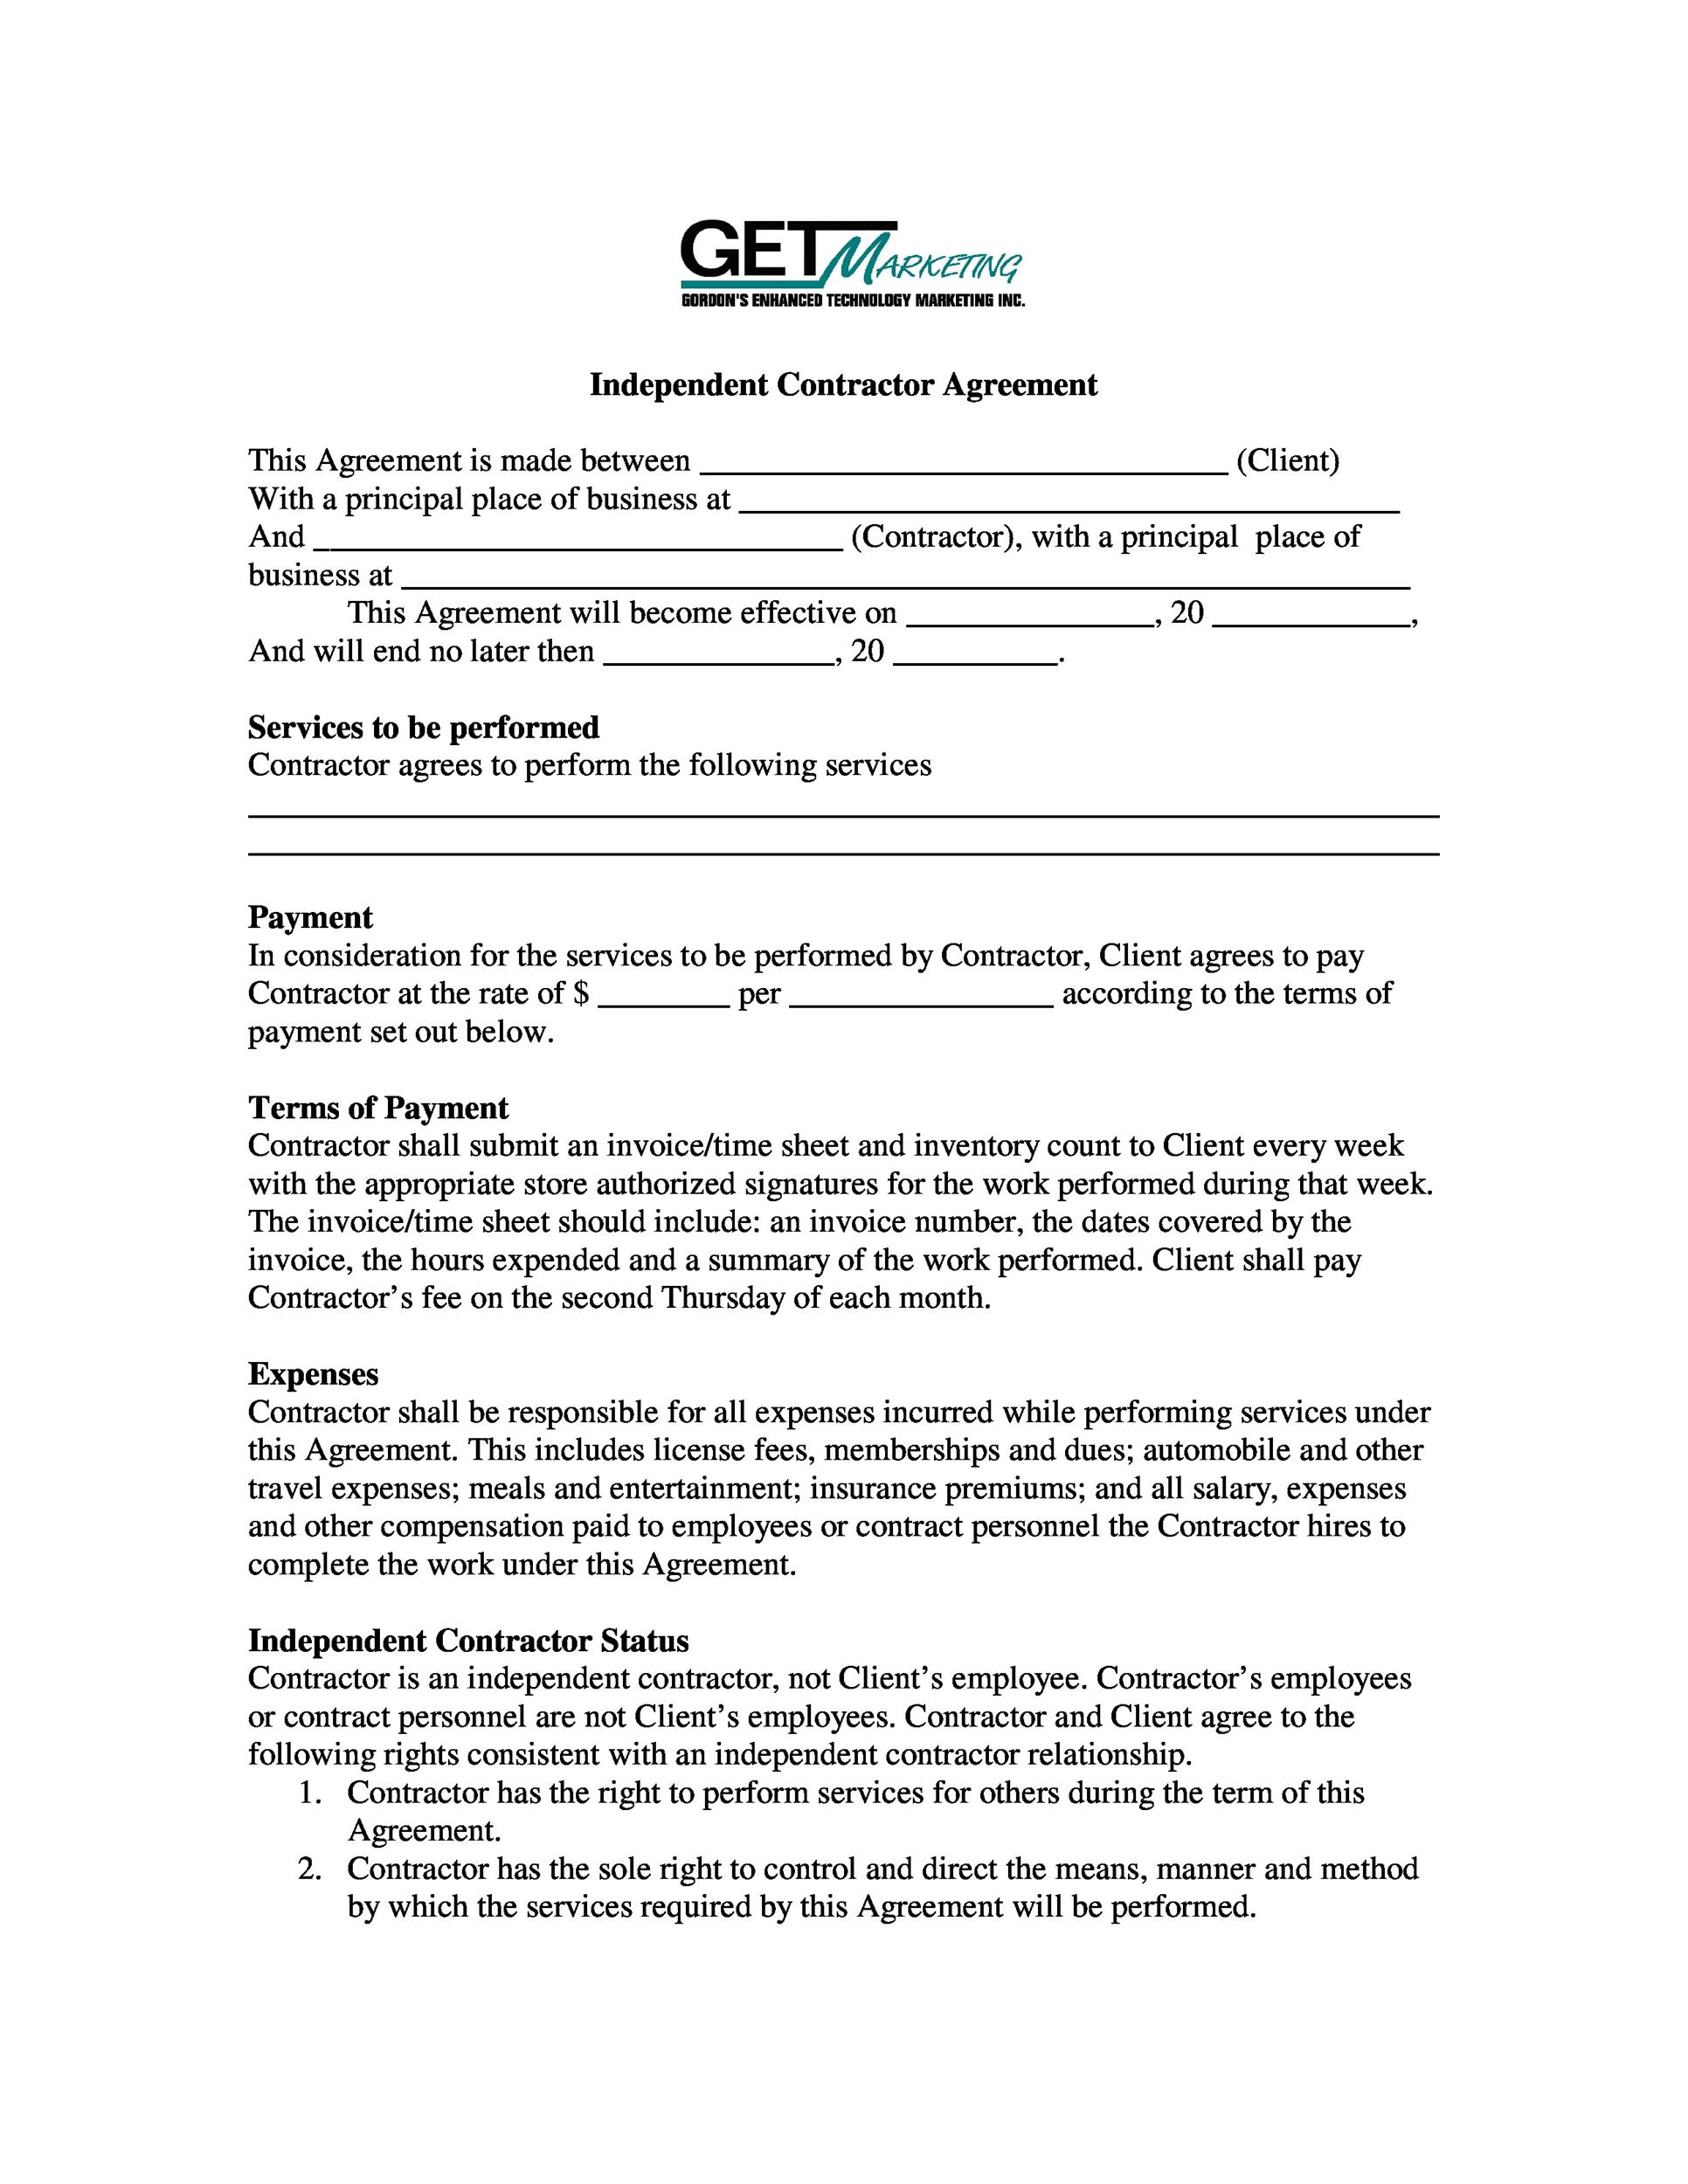 50 Free Independent Contractor Agreement Forms Templates Independent contractor agreement california template